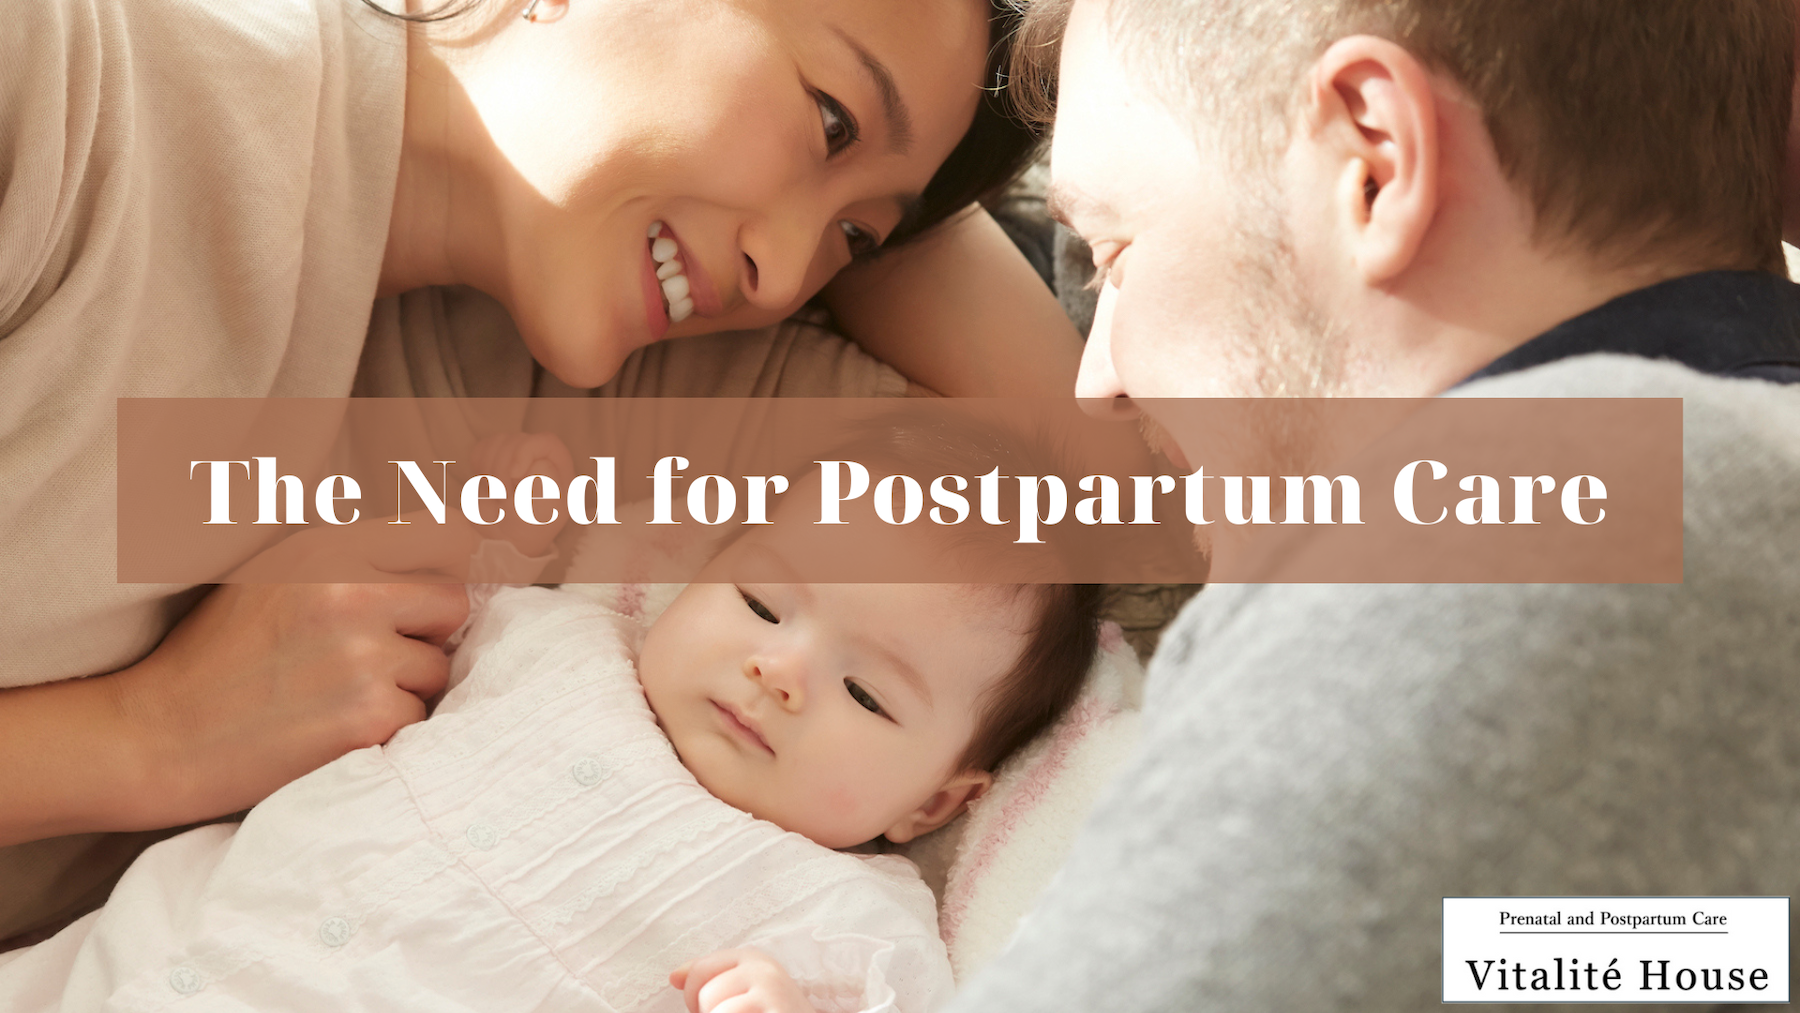 The Need for Postpartum Care - JapanLivingGuide.net - Living Guide in Japan